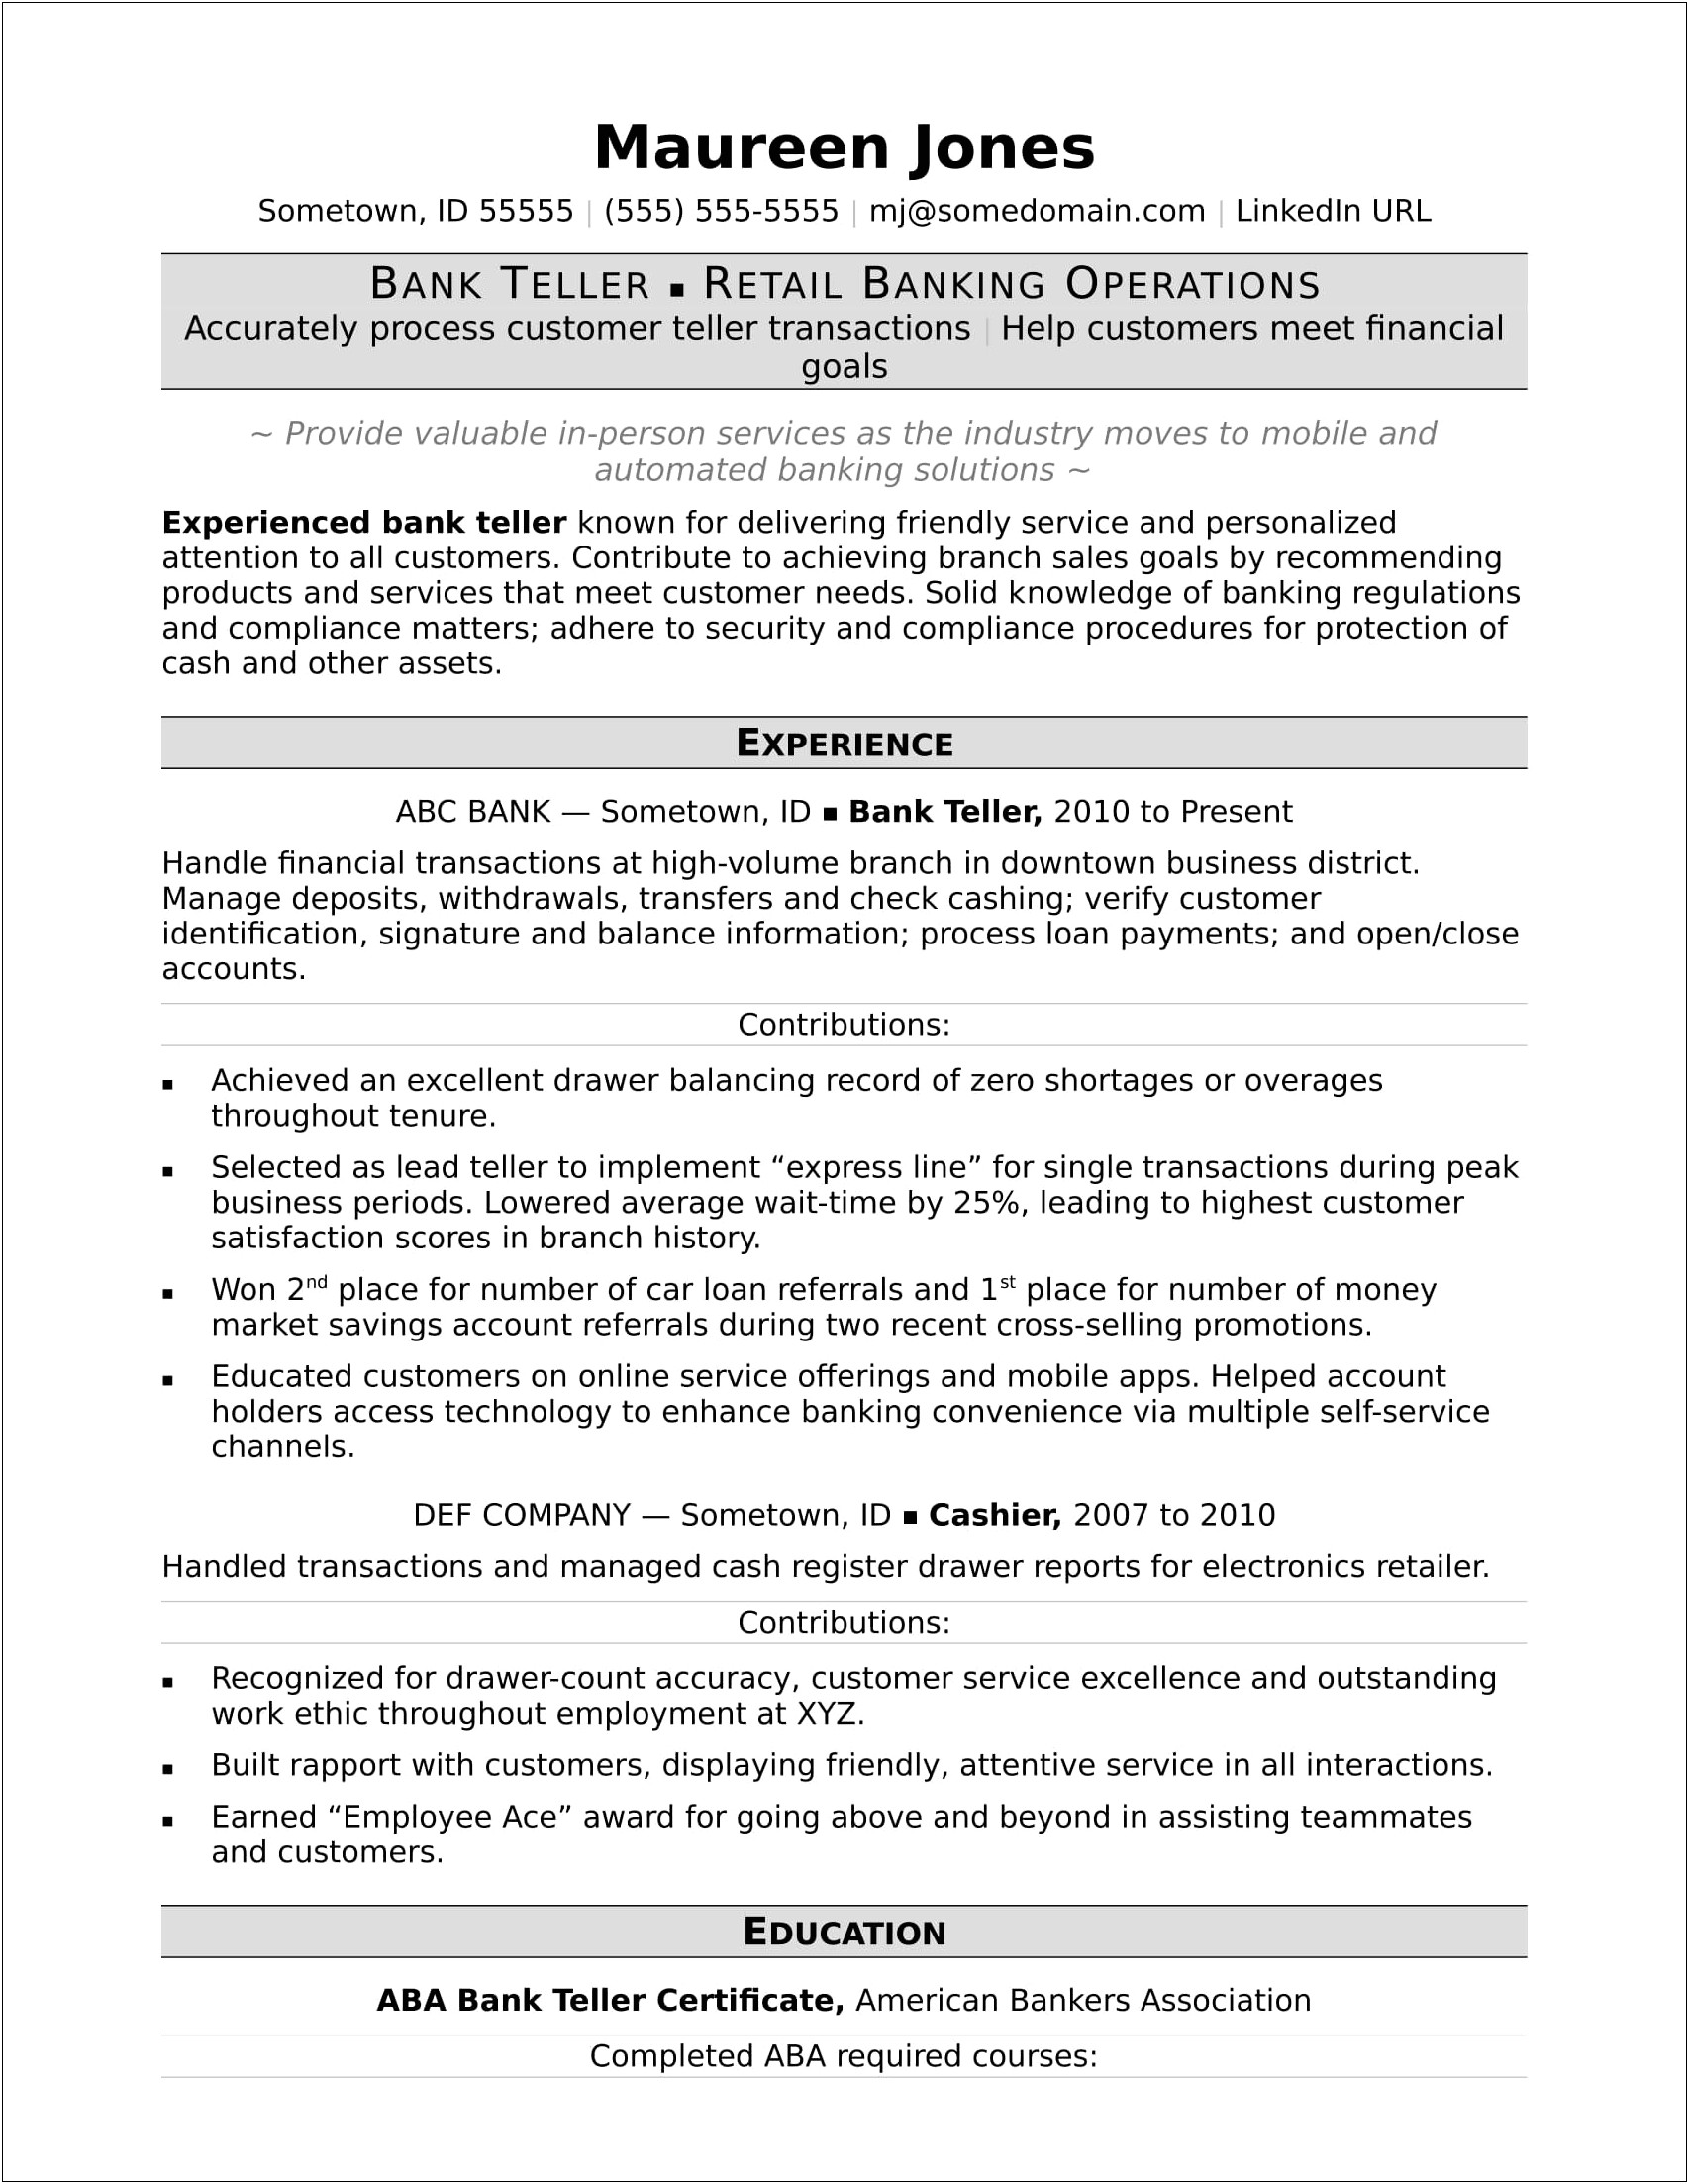 Resume Examples For Transferring Within A Company